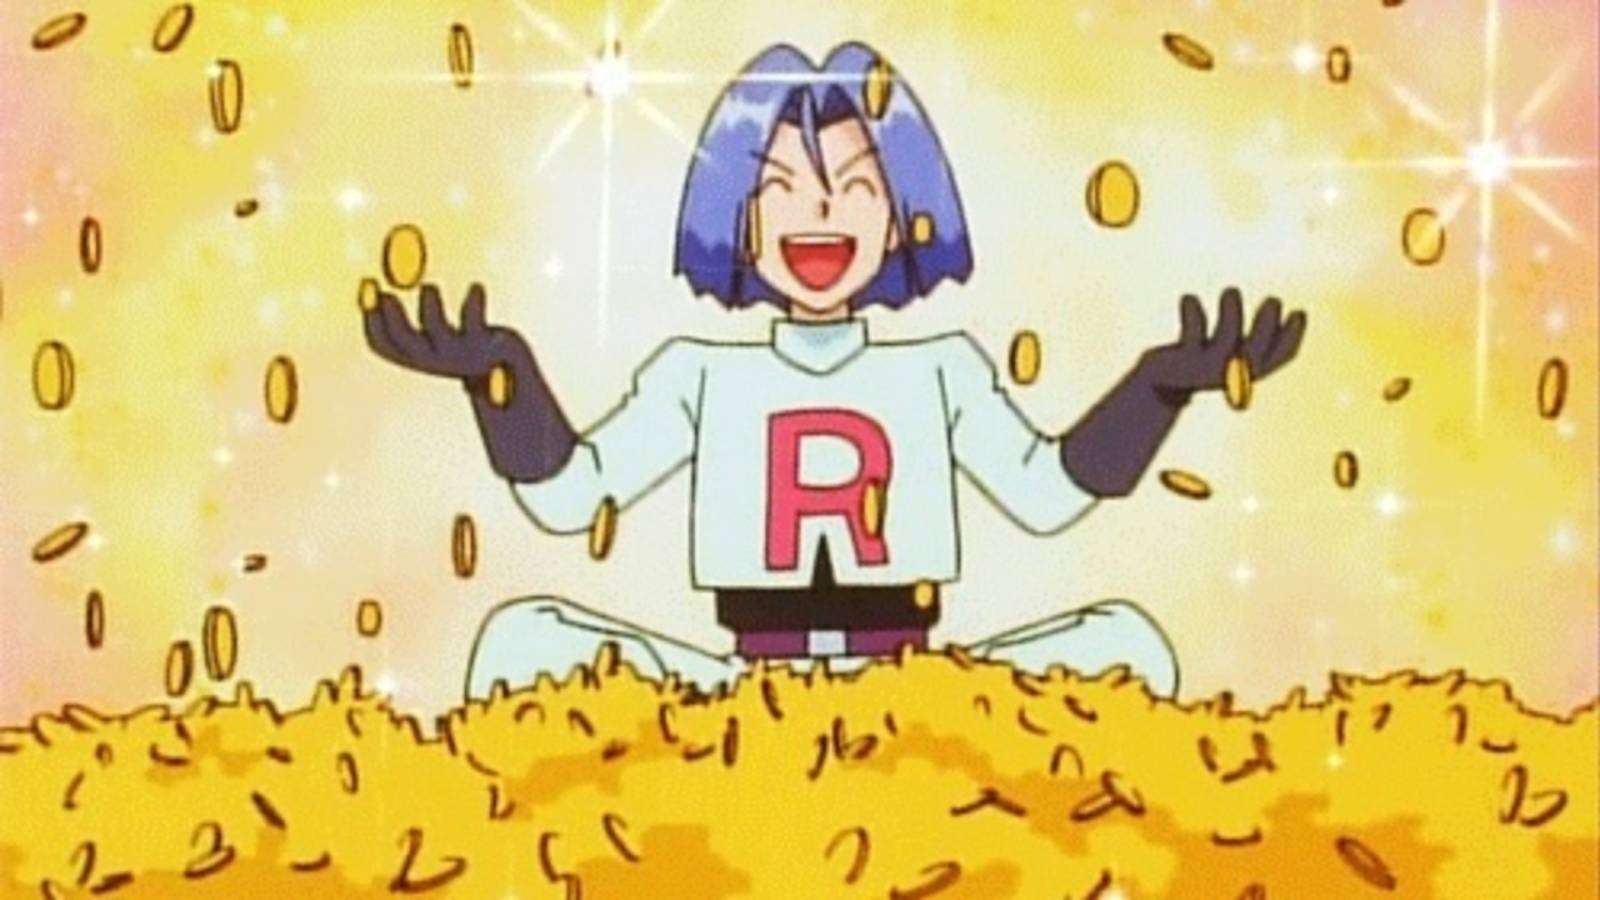 James from Pokemon sits in a pile of coins